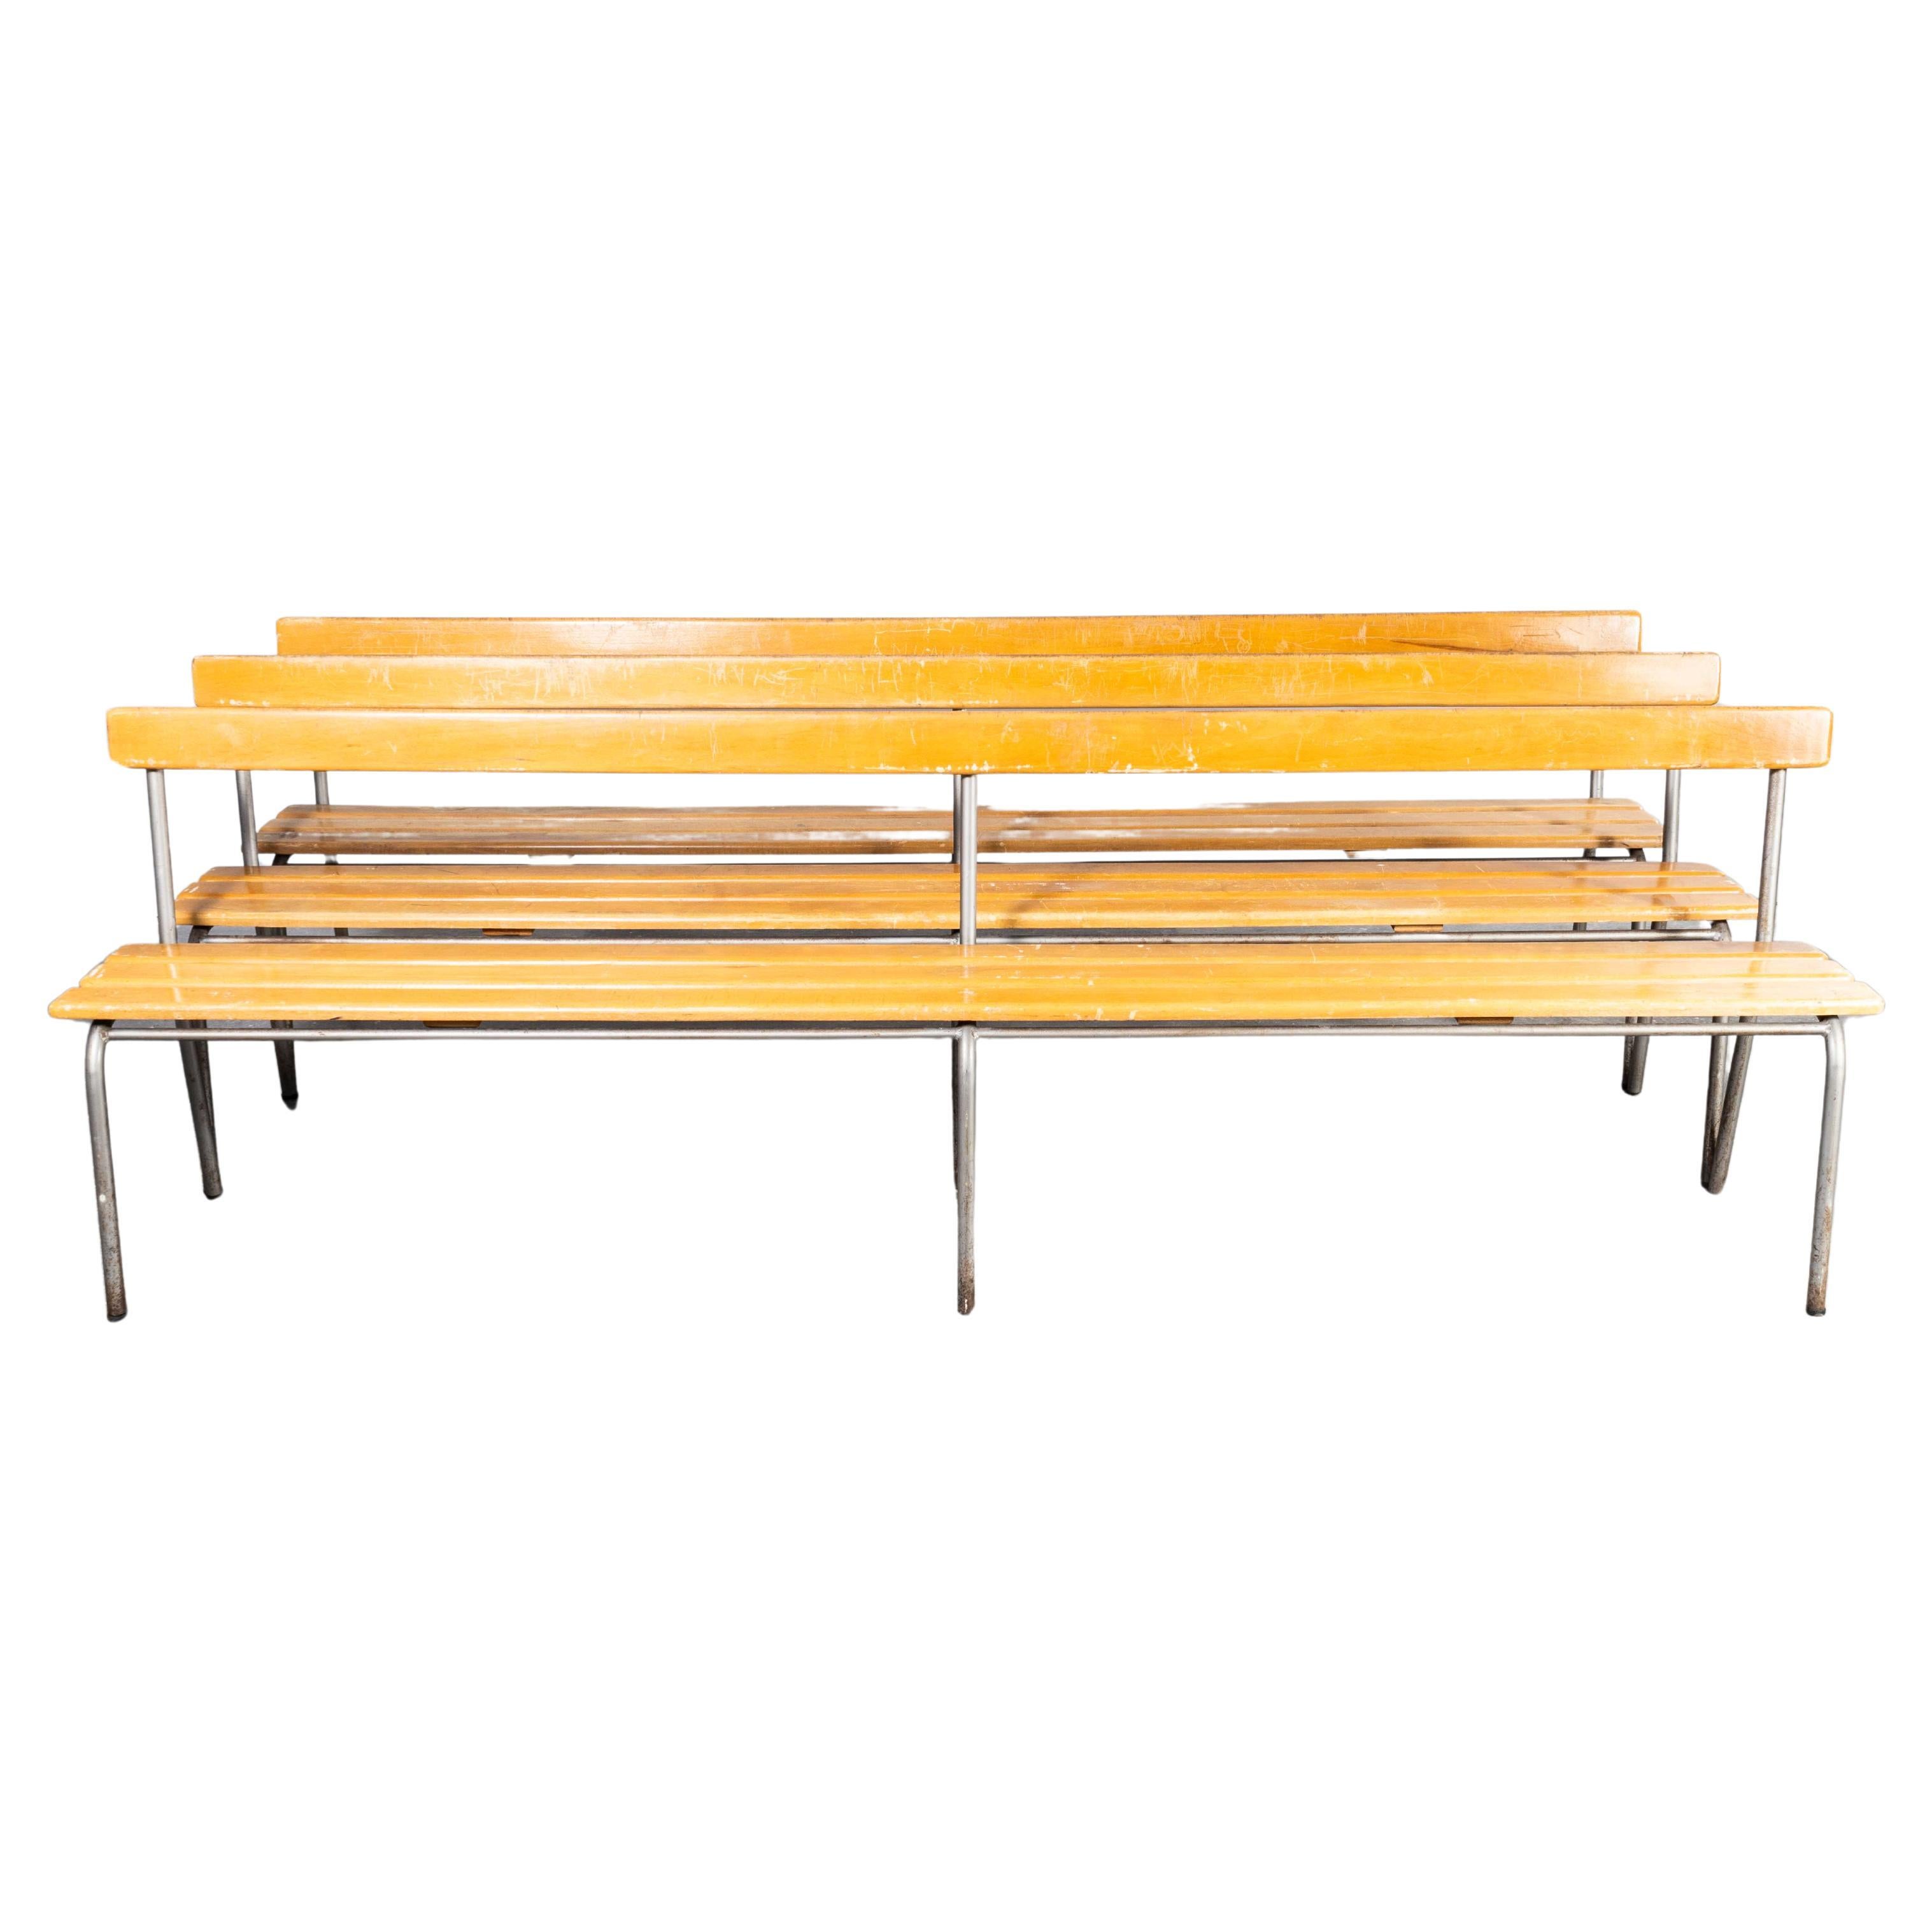 1950's Original Mullca Long Bench With Back - 2.5 Metre - Large Quantity Availab For Sale